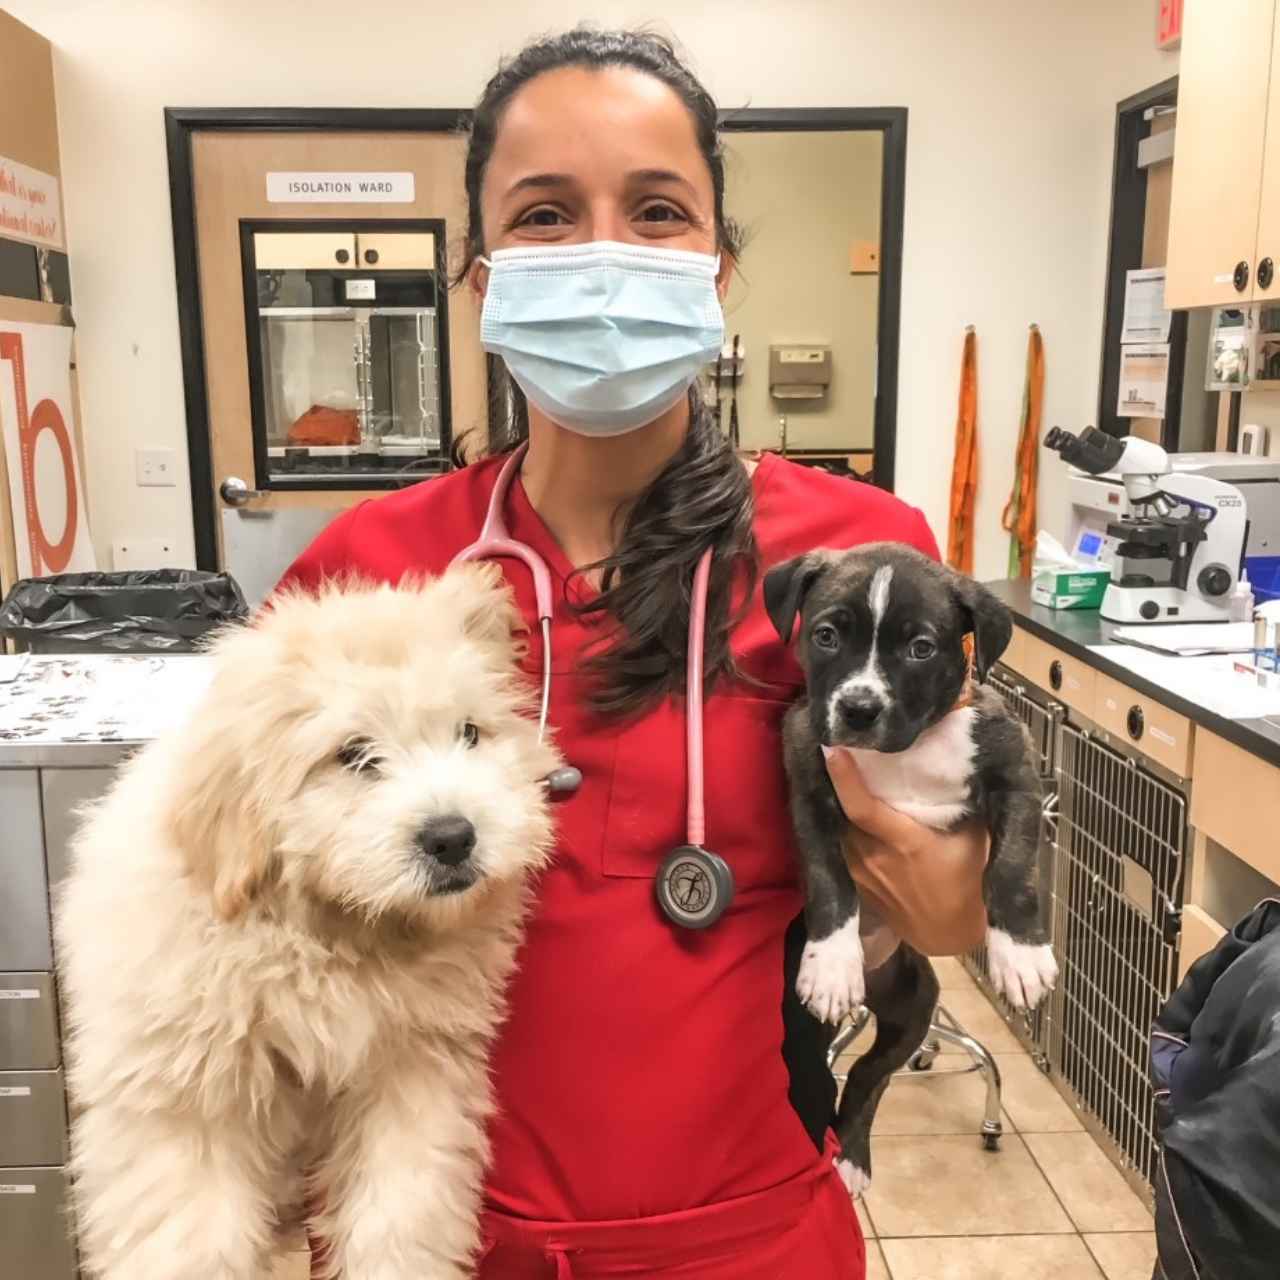 Staff member with two dogs